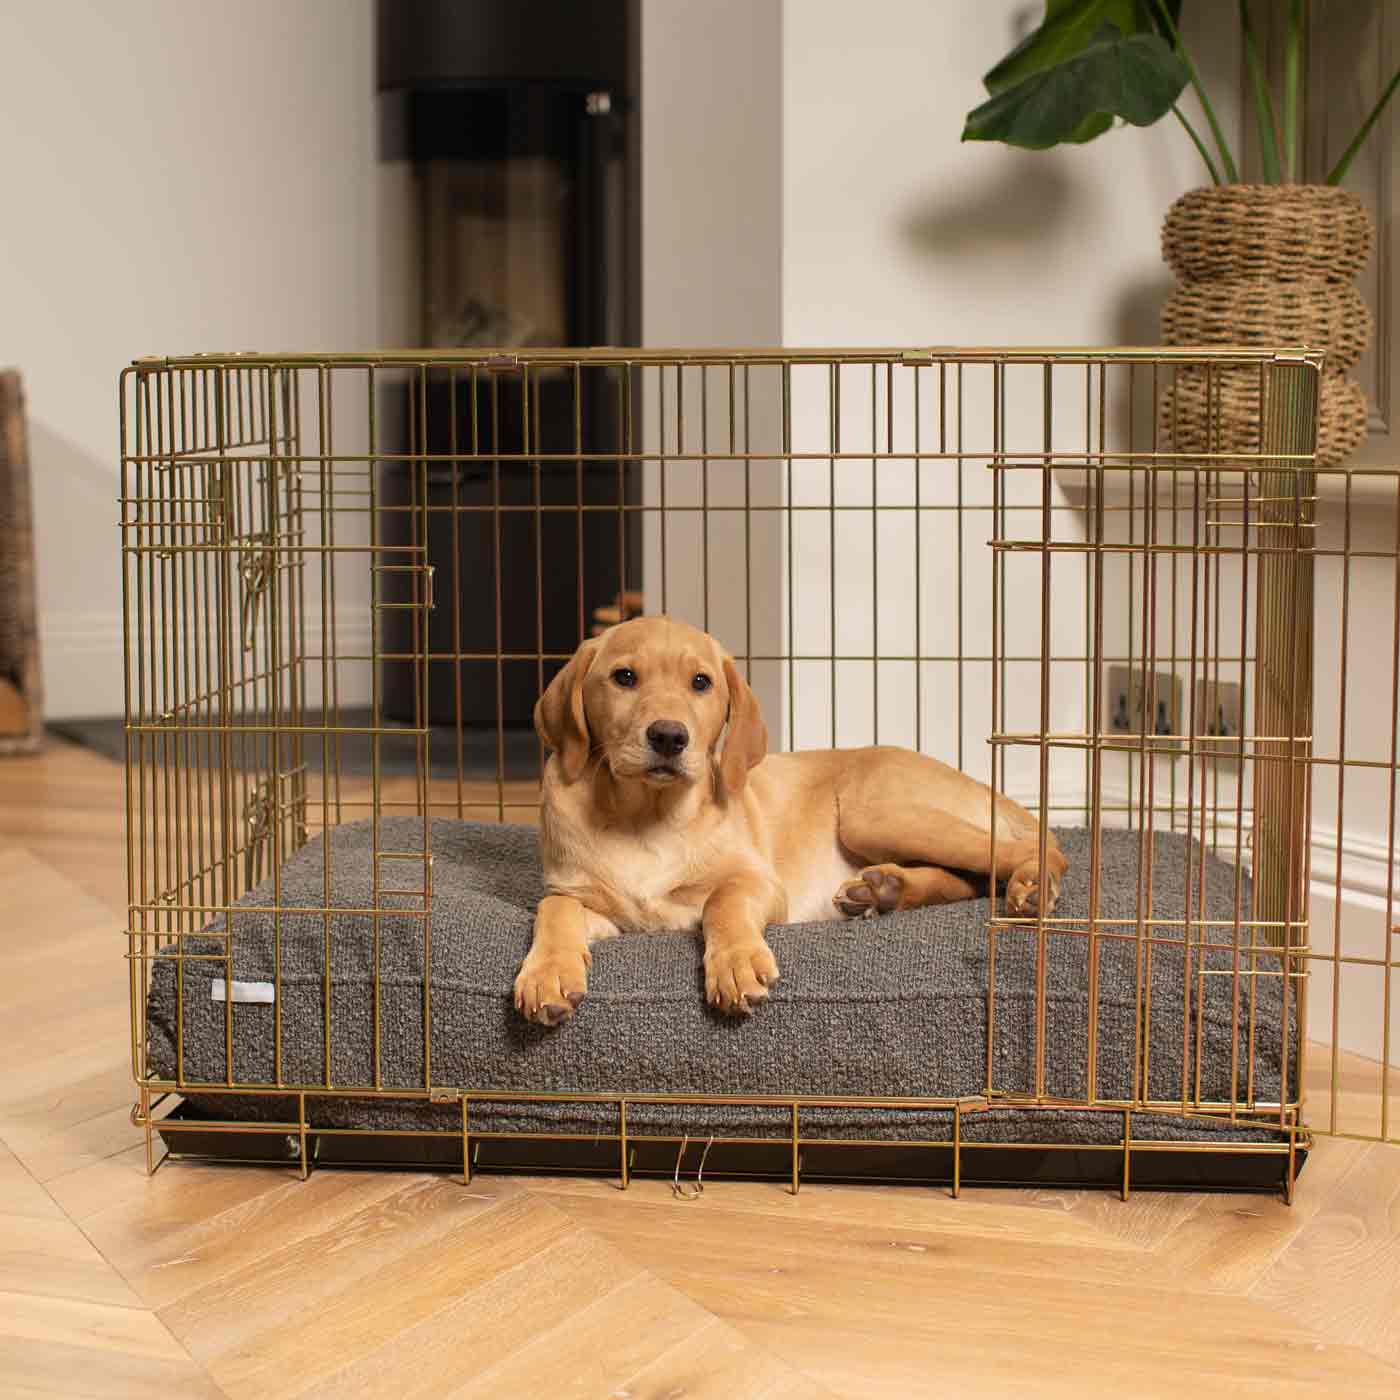 Discover Our Heavy-Duty Dog Cage With Luxury Dog Cushion Set! The Perfect Cage Accessory For Pet Burrow. Available To Personalize In Stunning Ivory, Mink, Granite Bouclé Here at Lords & Labradors US